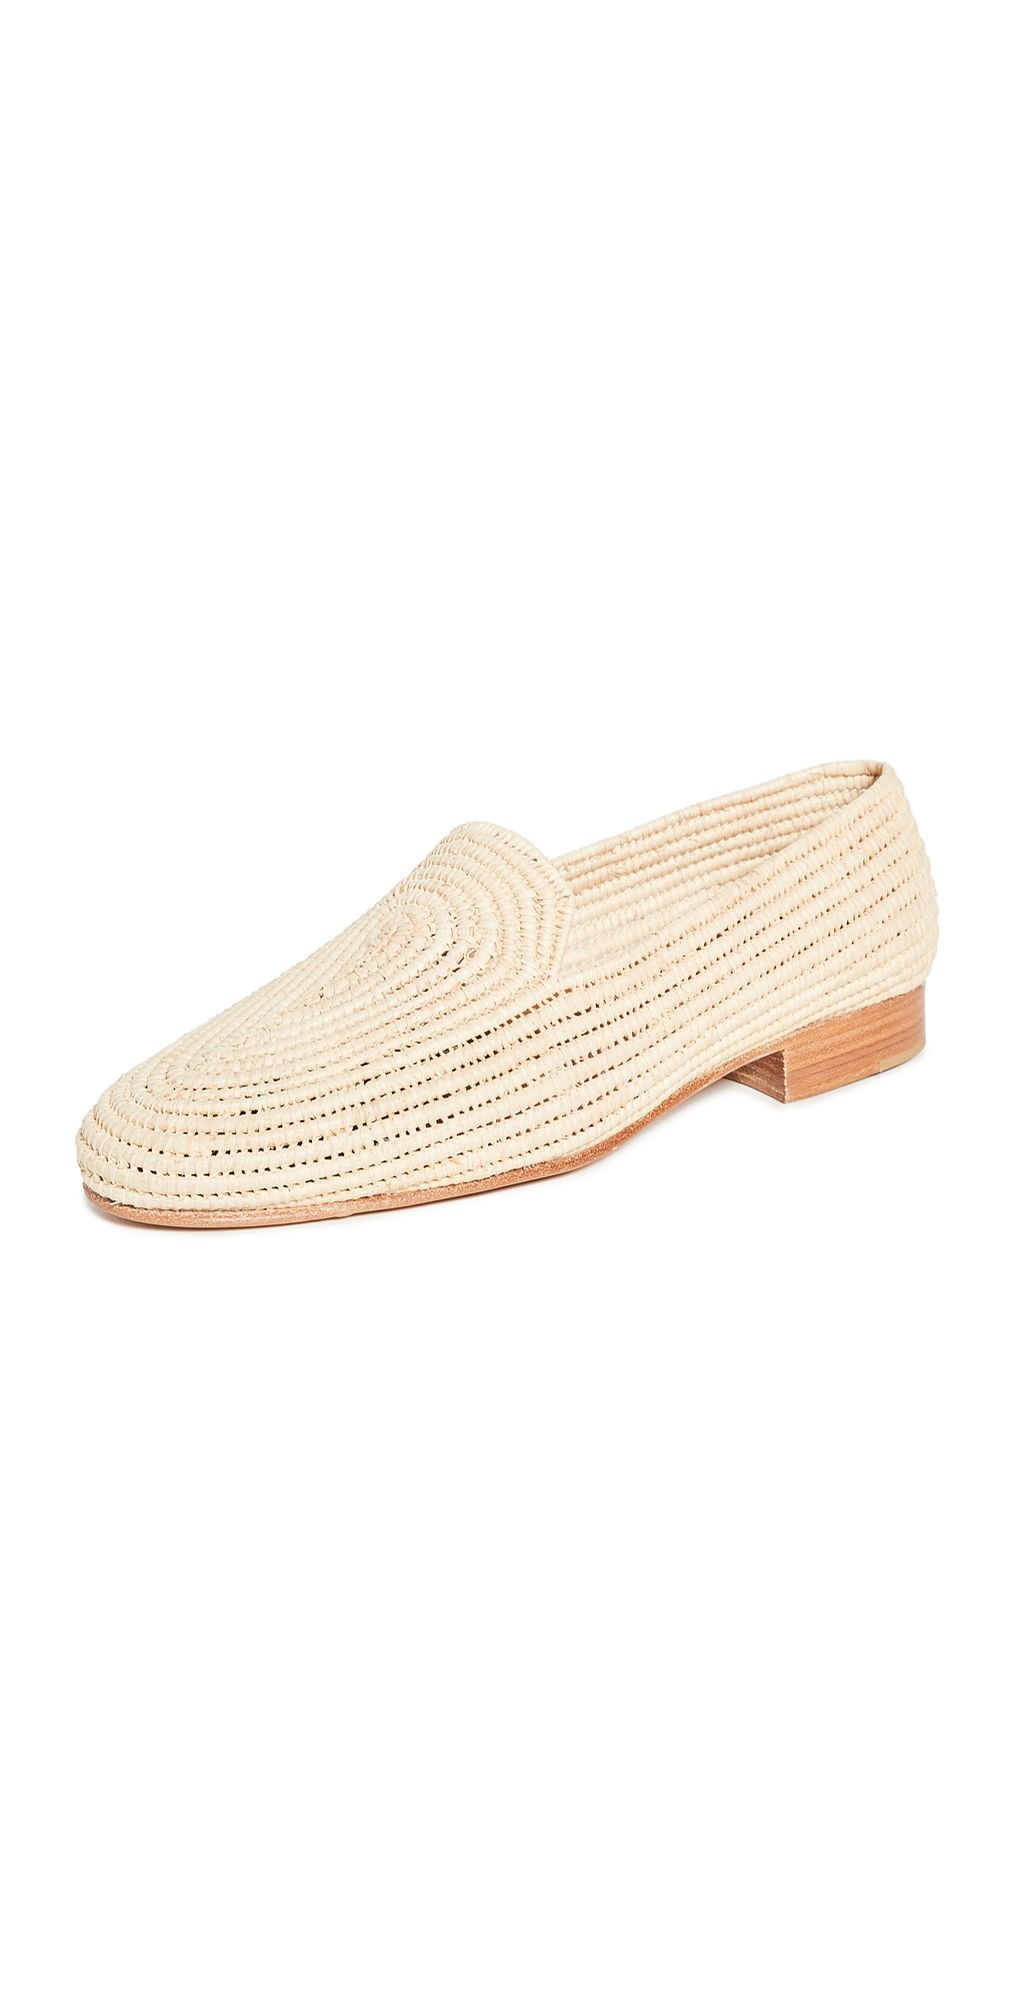 Carrie Forbes Atlas Loafers | Shopbop